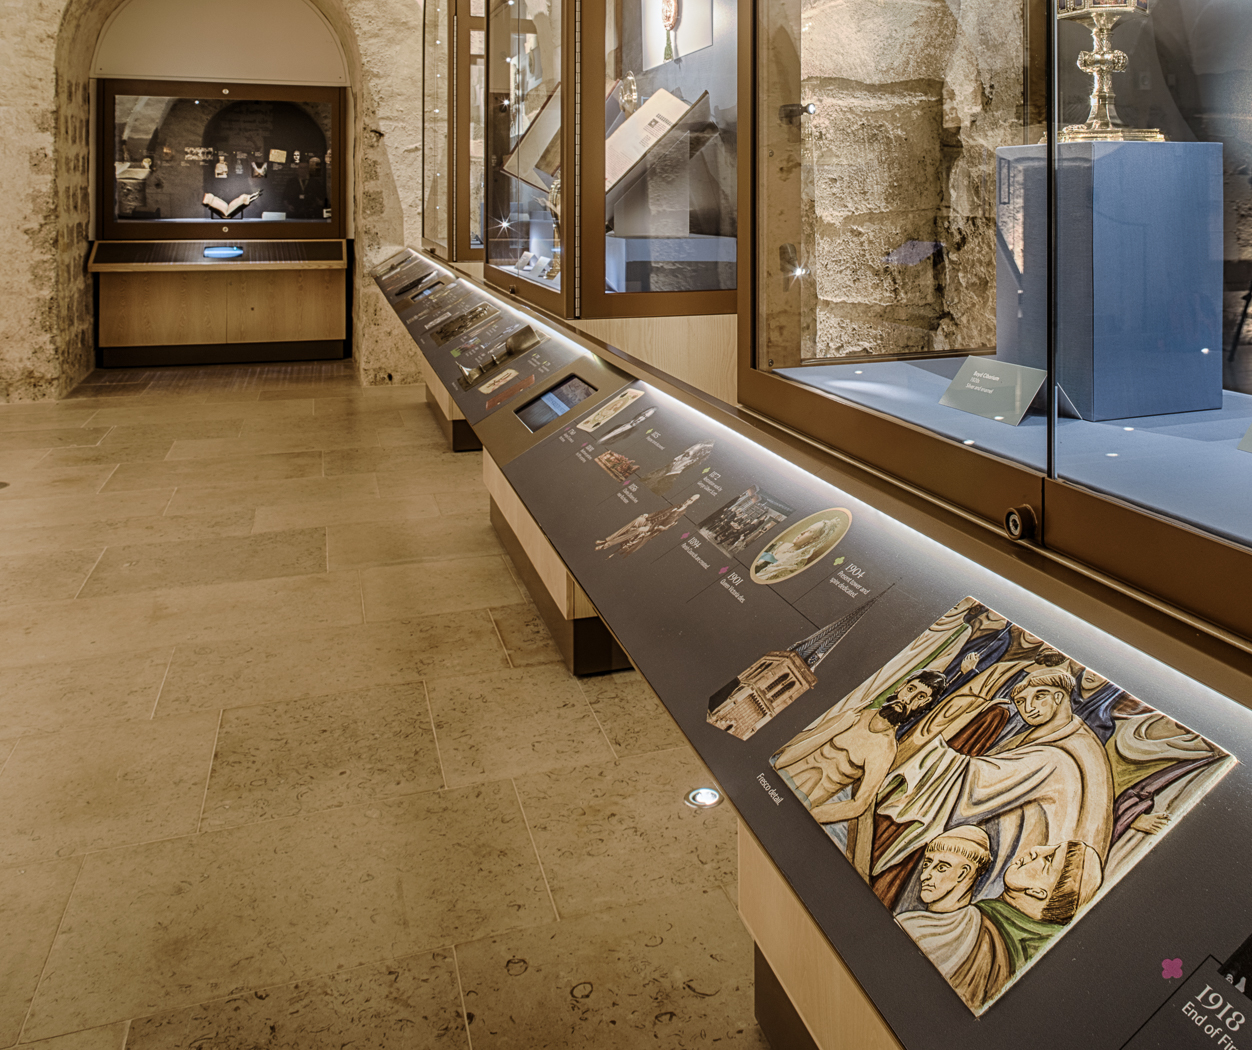 The exhibition space in the Crypt, showing the new display cases and interpretation.